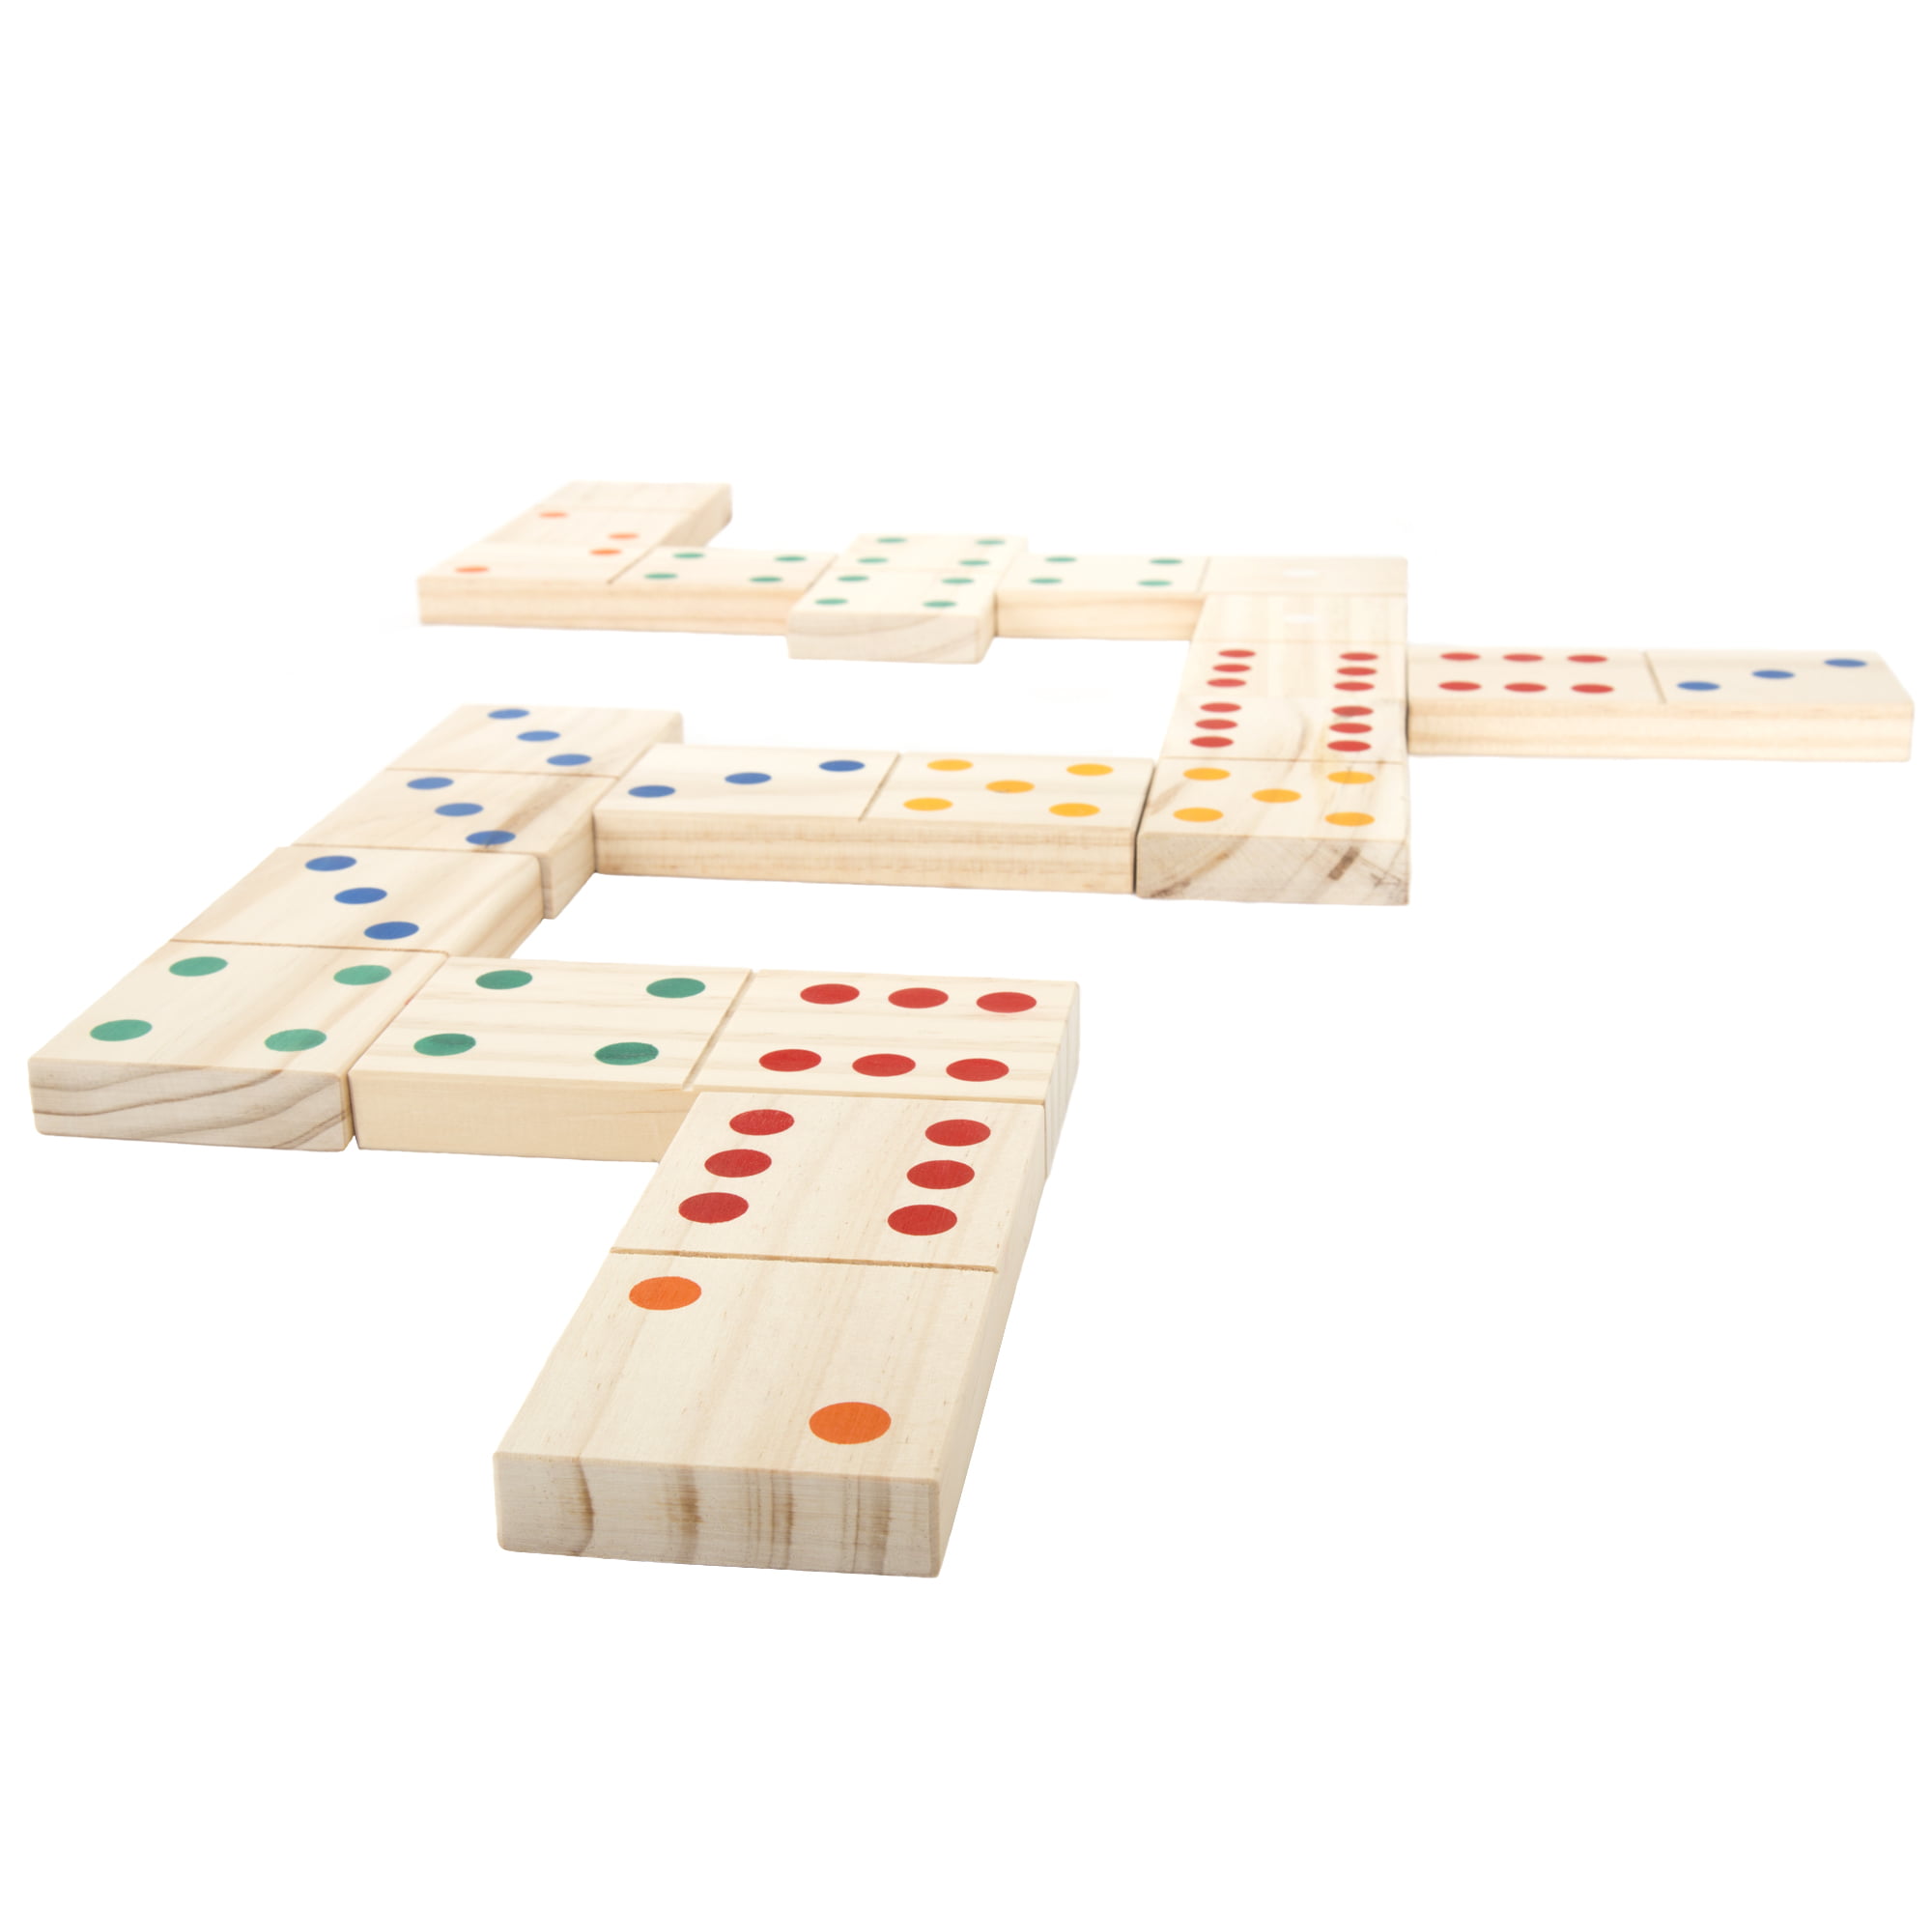 Kids Adults Outdoor Family Fun Details about   Giant Wooden Dominoes Game Set With Carrying Bag 